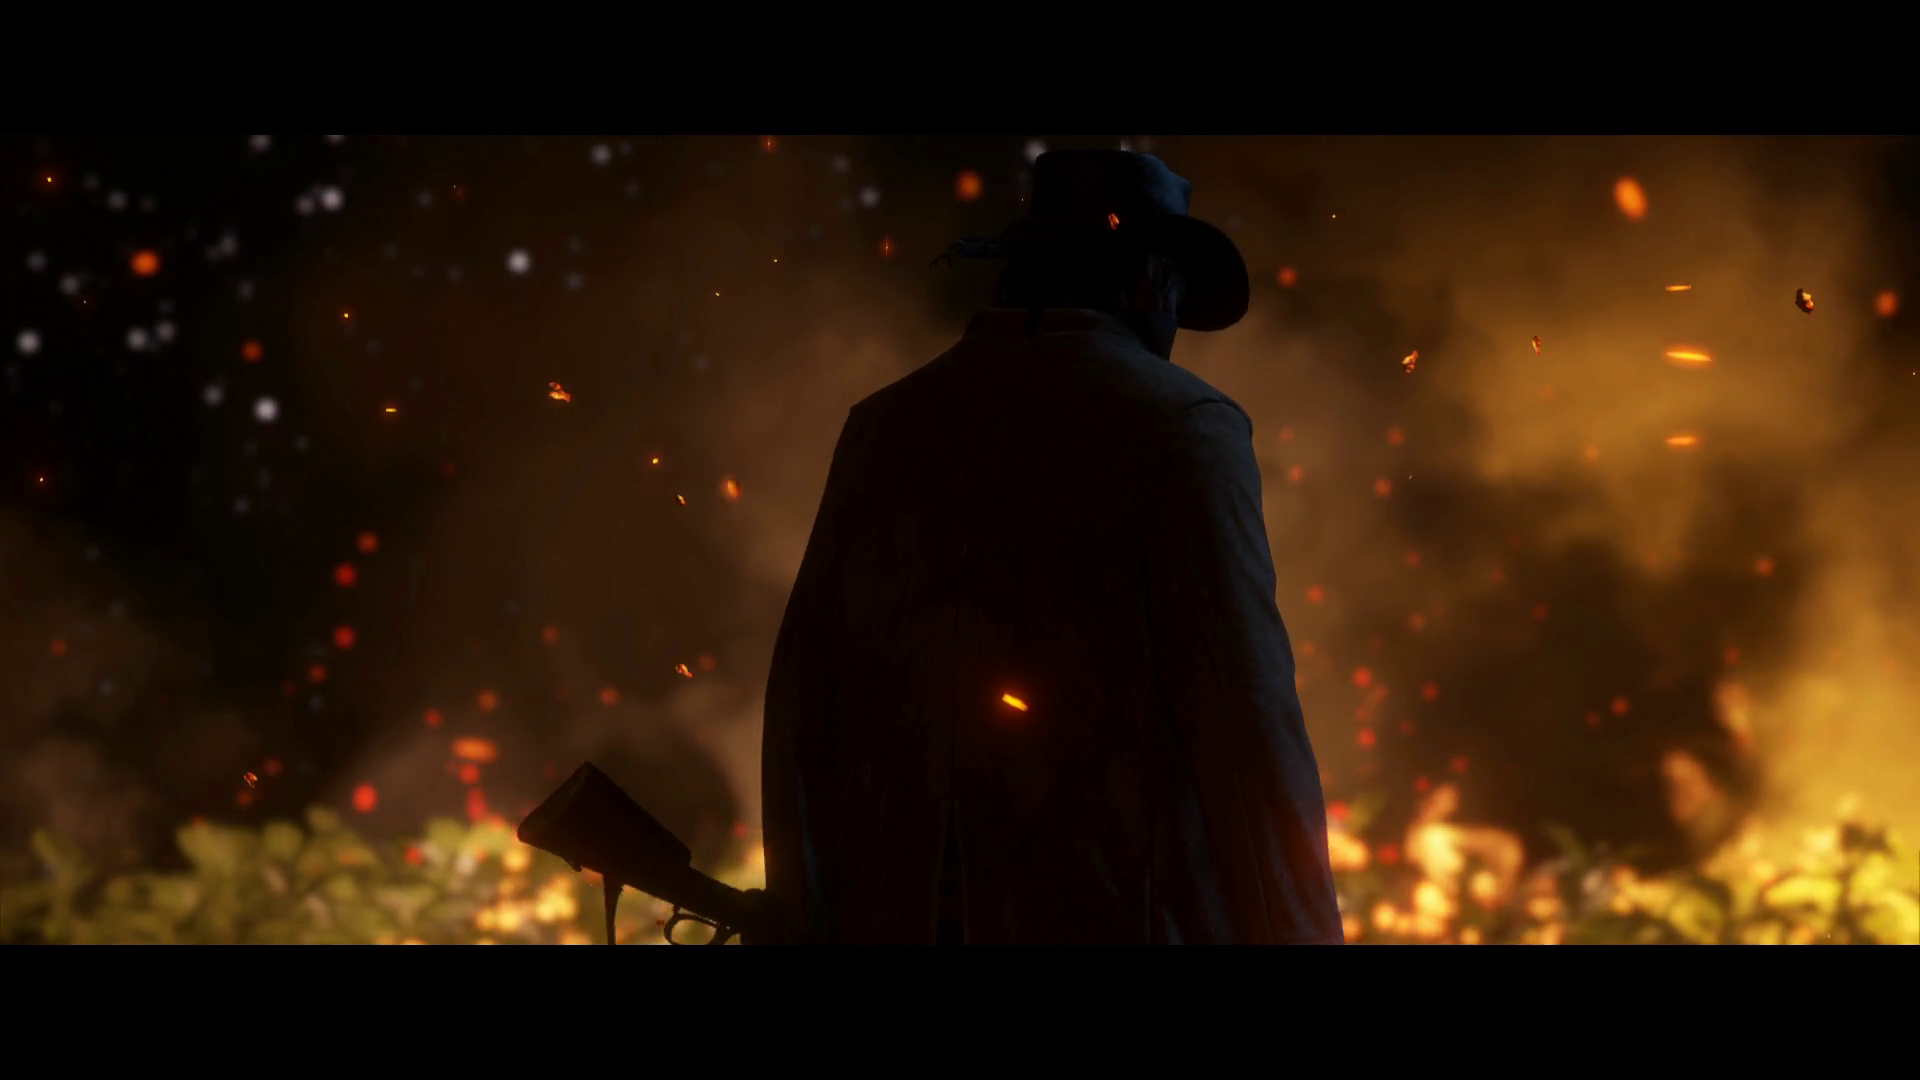 http://www.rdrvision.com/images/content/red-dead-redemption-2/trailer_1/red-dead-redemption-2_trailer-1_19.png